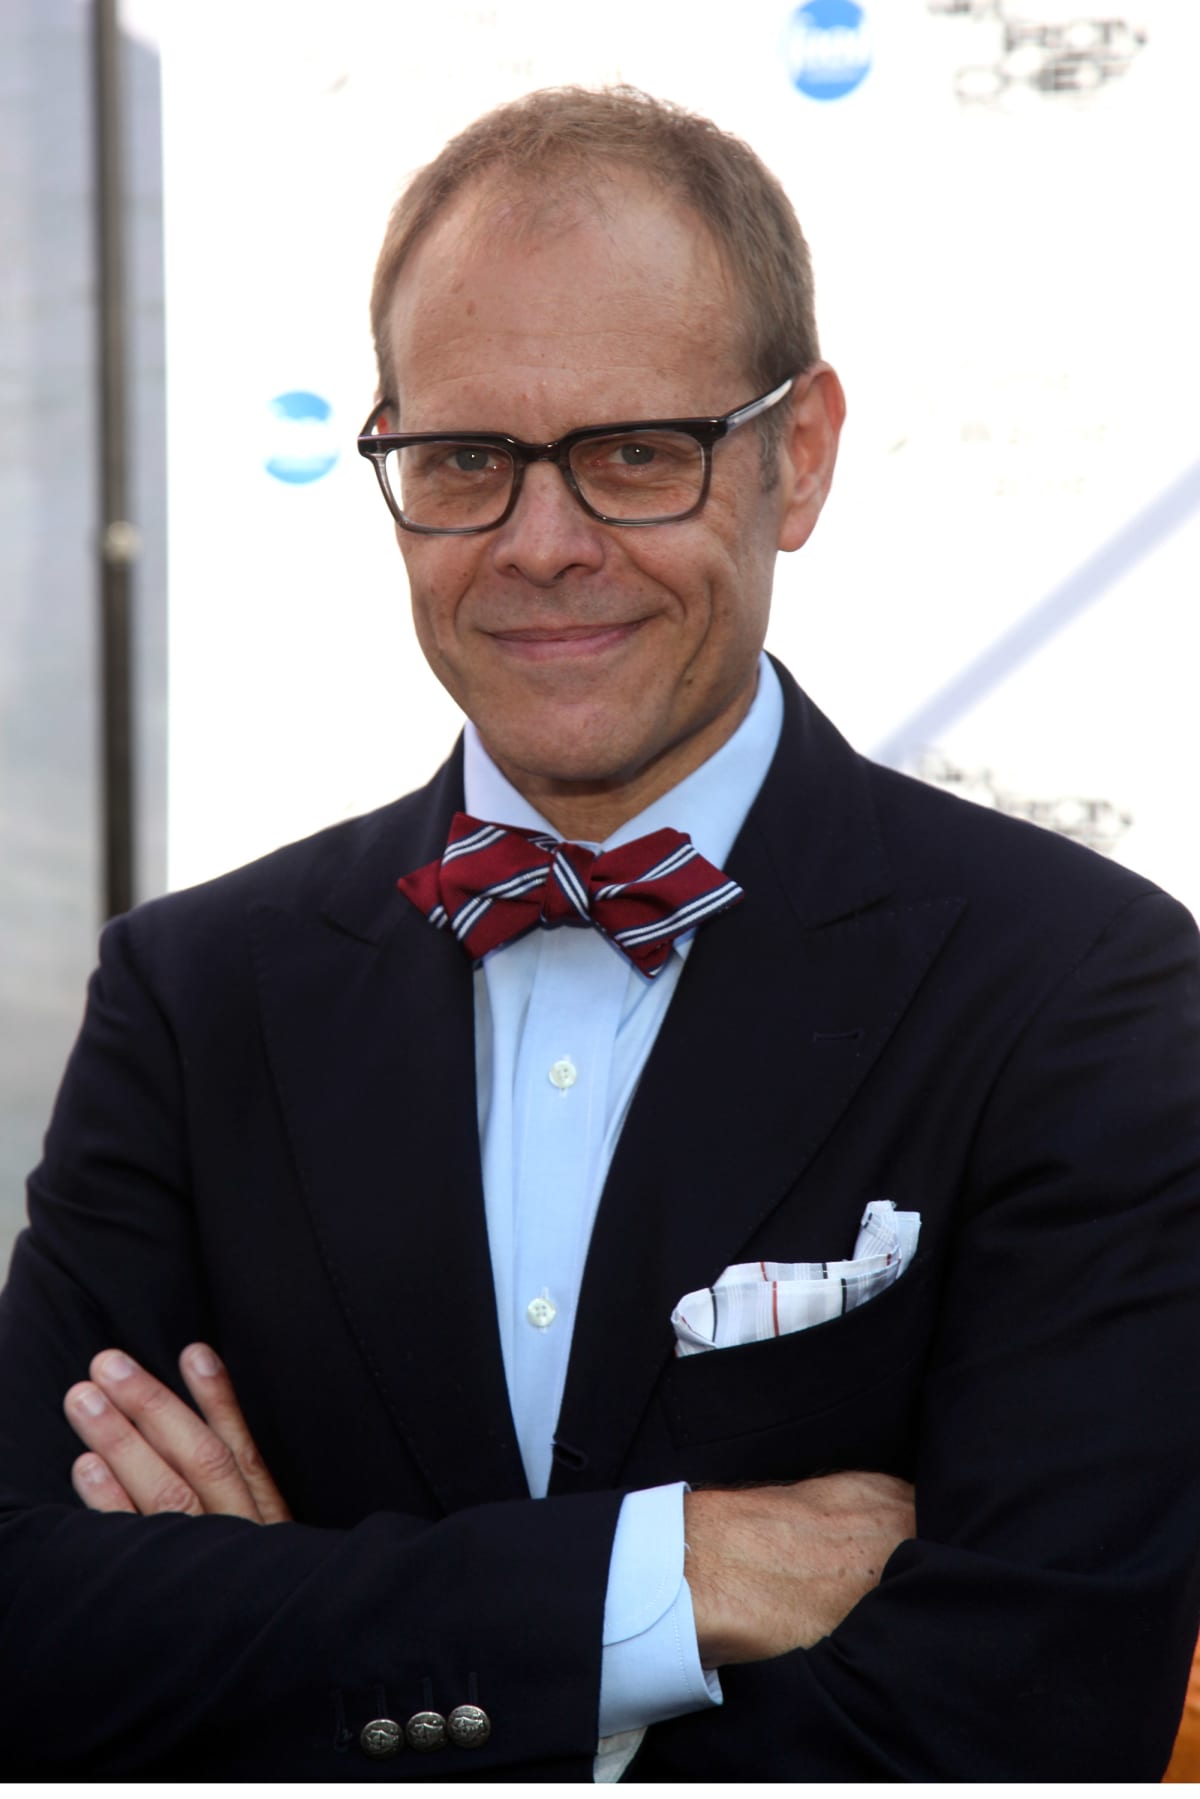 ATLANTA, GA - SEPTEMBER 14:  (EXCLUSIVE COVERAGE)  American television personality Alton Brown attends Atlanta Premiere of Cirque du Soleil's "LUZIA - A Waking Dream of Mexico" at Big Top at Atlantic Station on September 14, 2017 in Atlanta, Georgia.  (Photo by Paras Griffin/Getty Images for Cirque du Soleil)